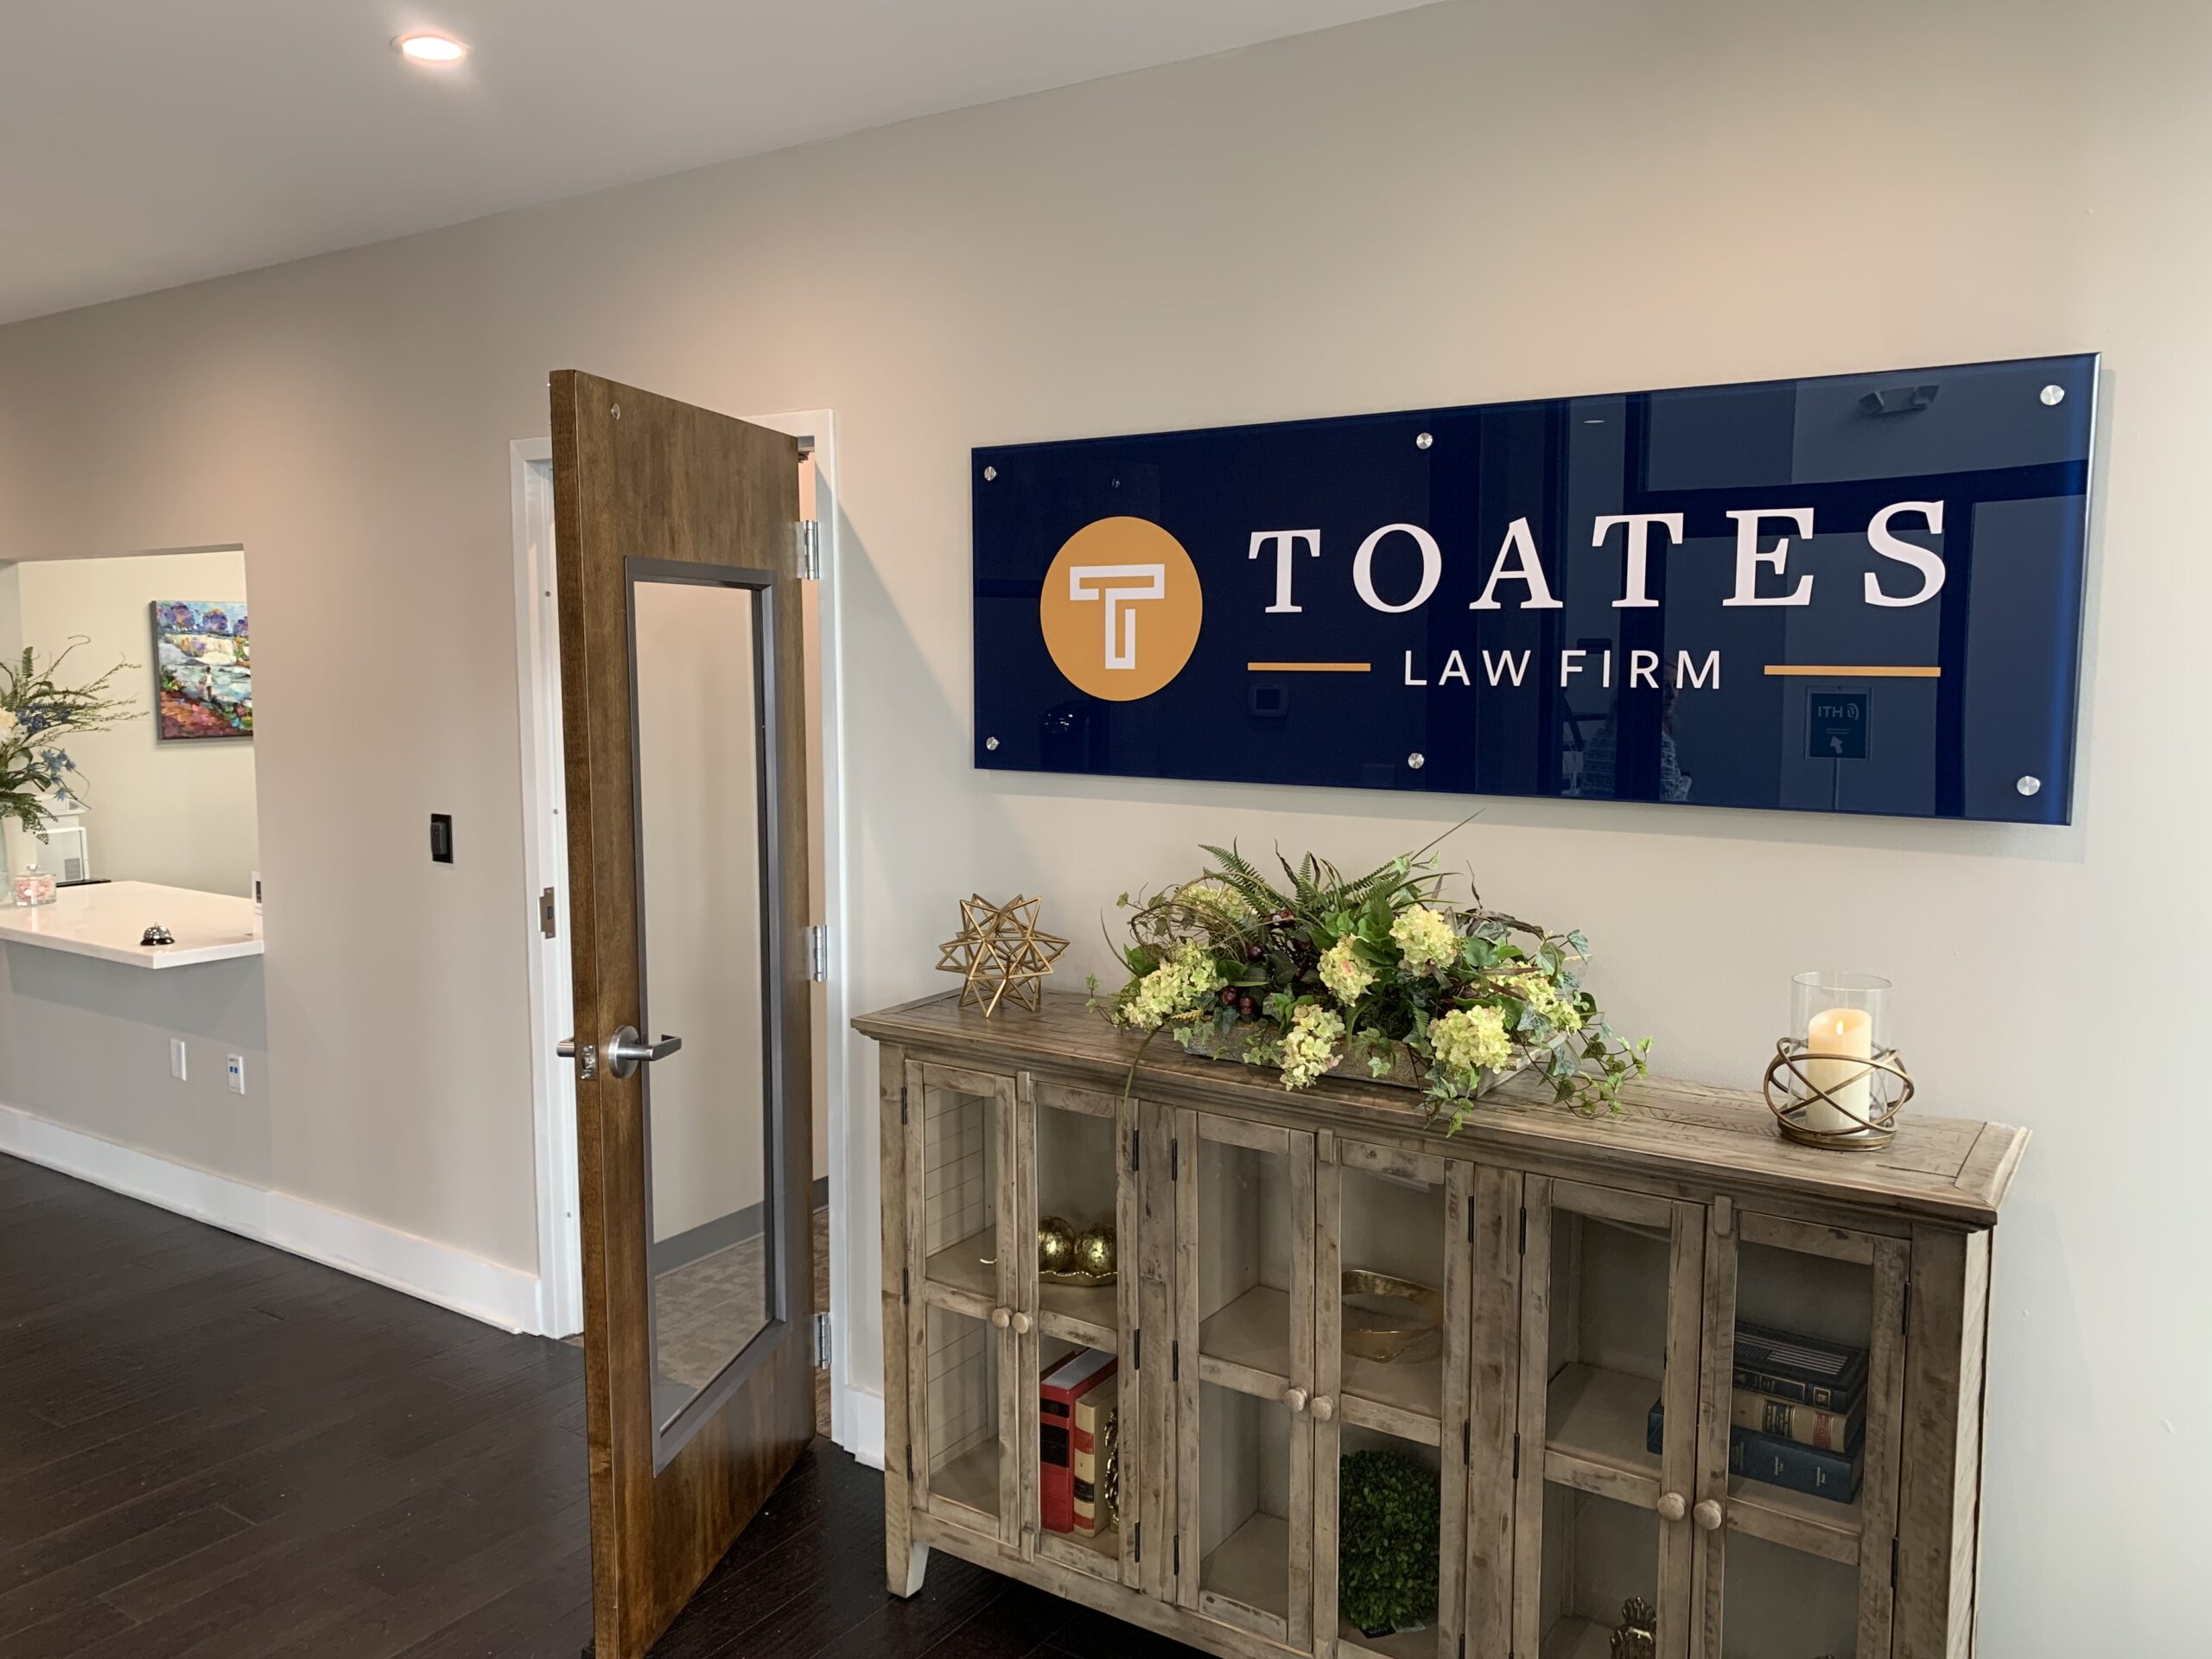 Toates Law Firm